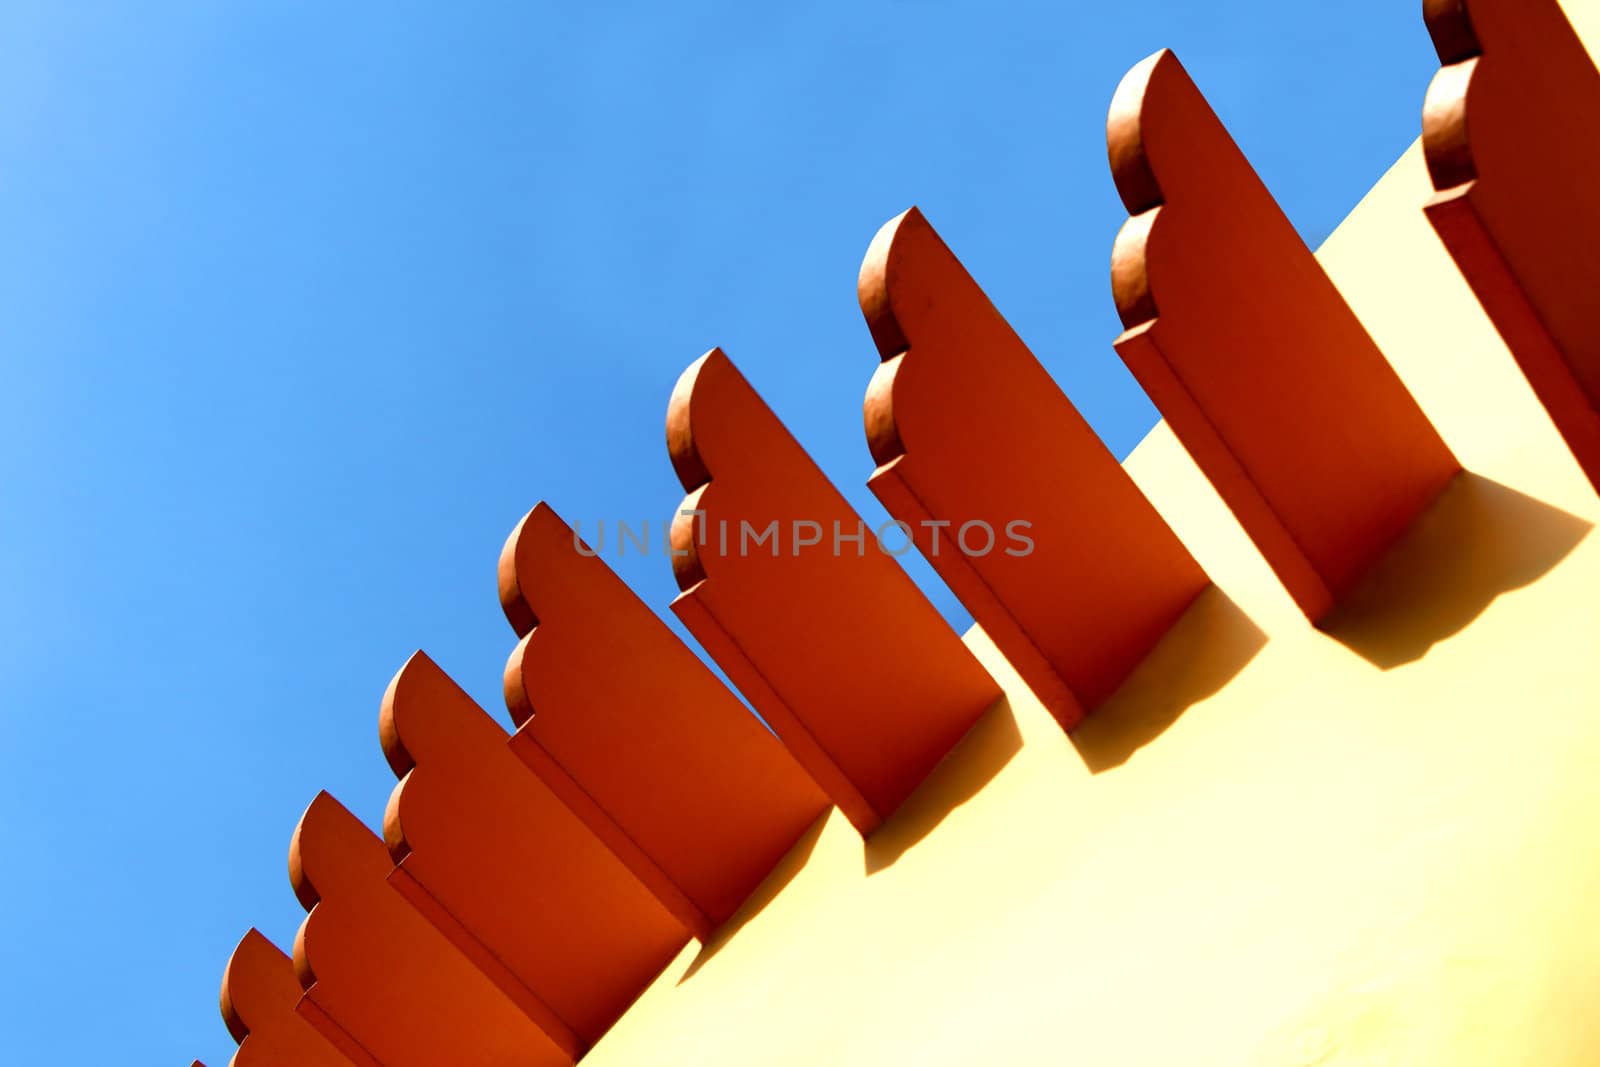 Wooden exterior wall decor against the clear blue sky